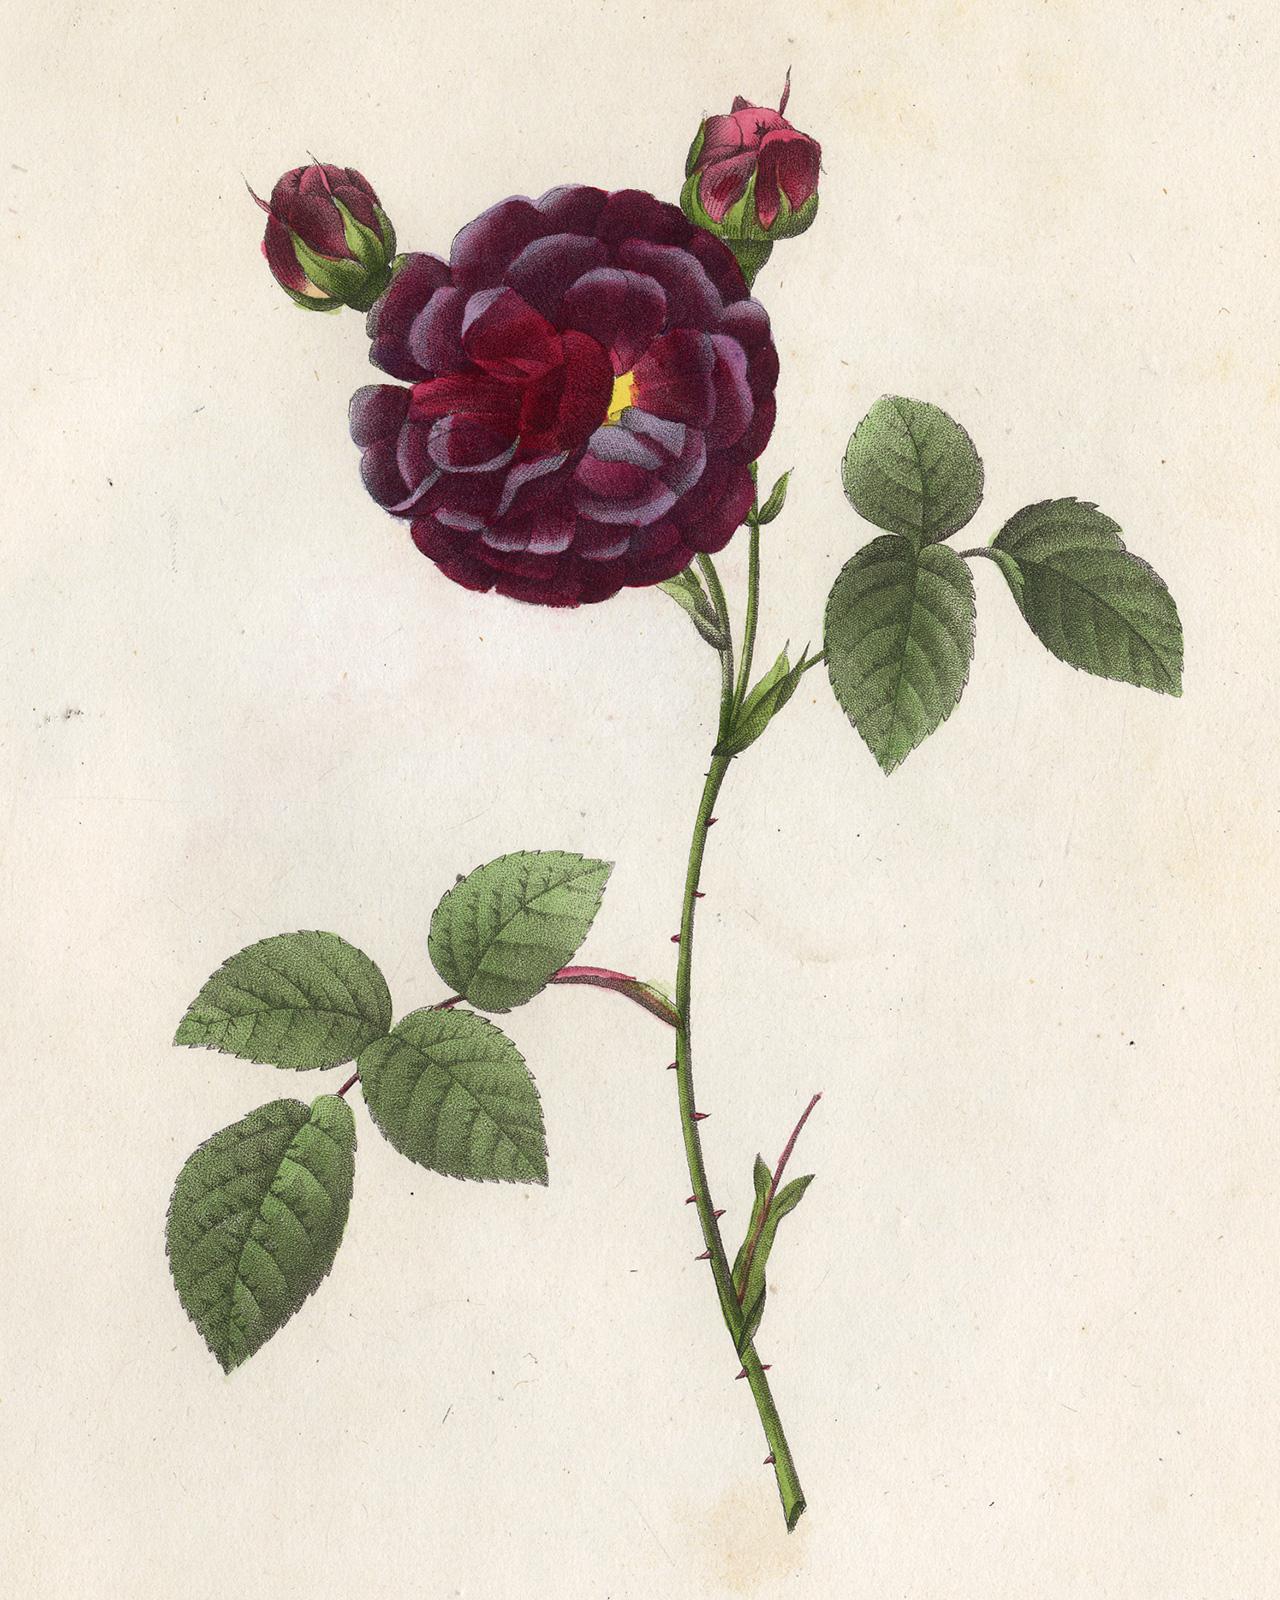 Gallica Puytrenea by Redoute - Les Roses - Handcoloured engraving - 19th century - Print by Pierre-Joseph Redouté